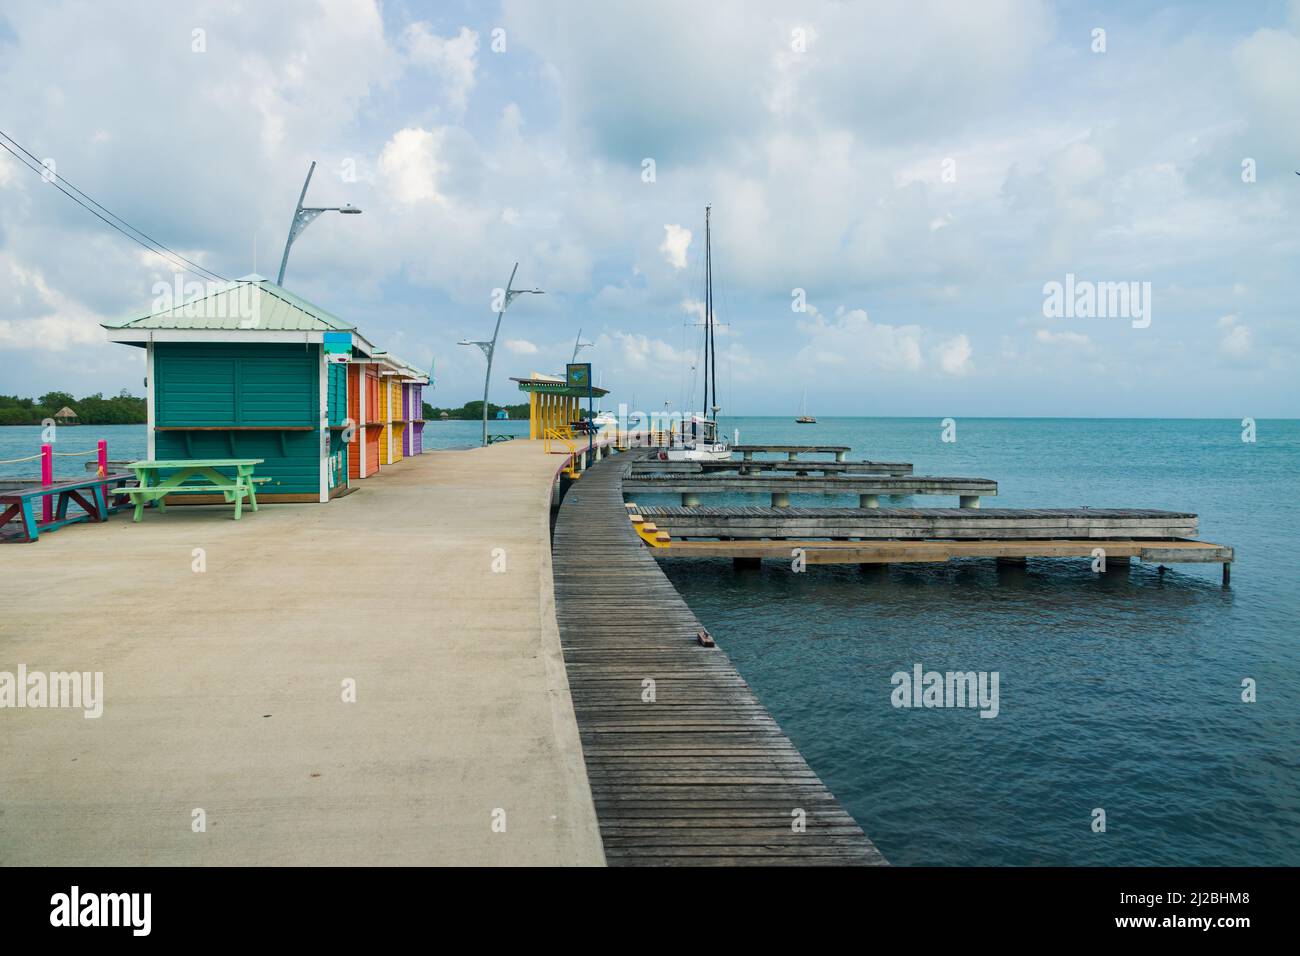 Colorful huts at the wooden boat dock at the harbor of Placencia, Belize Stock Photo